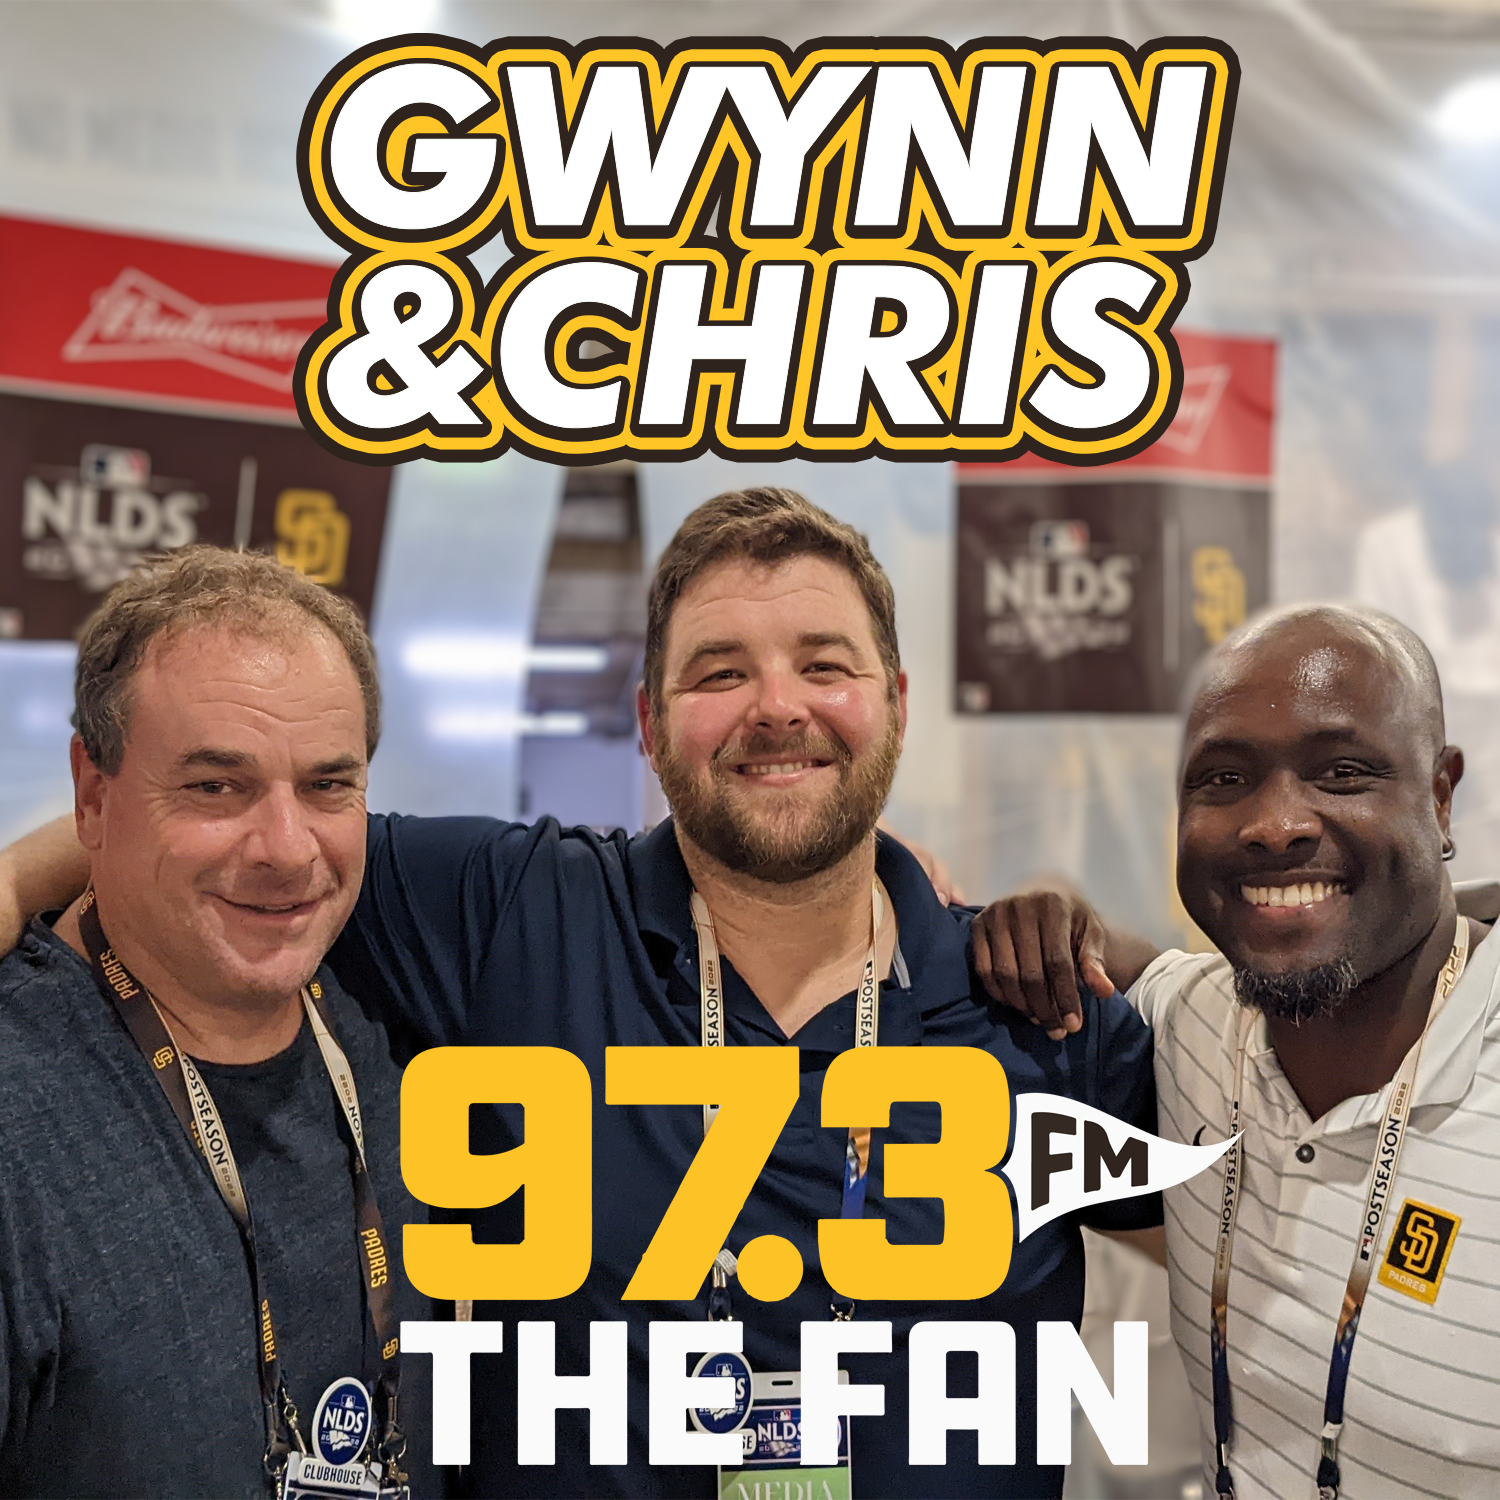 5.1.24 Gwynn & Chris: Padres take the series from the Reds